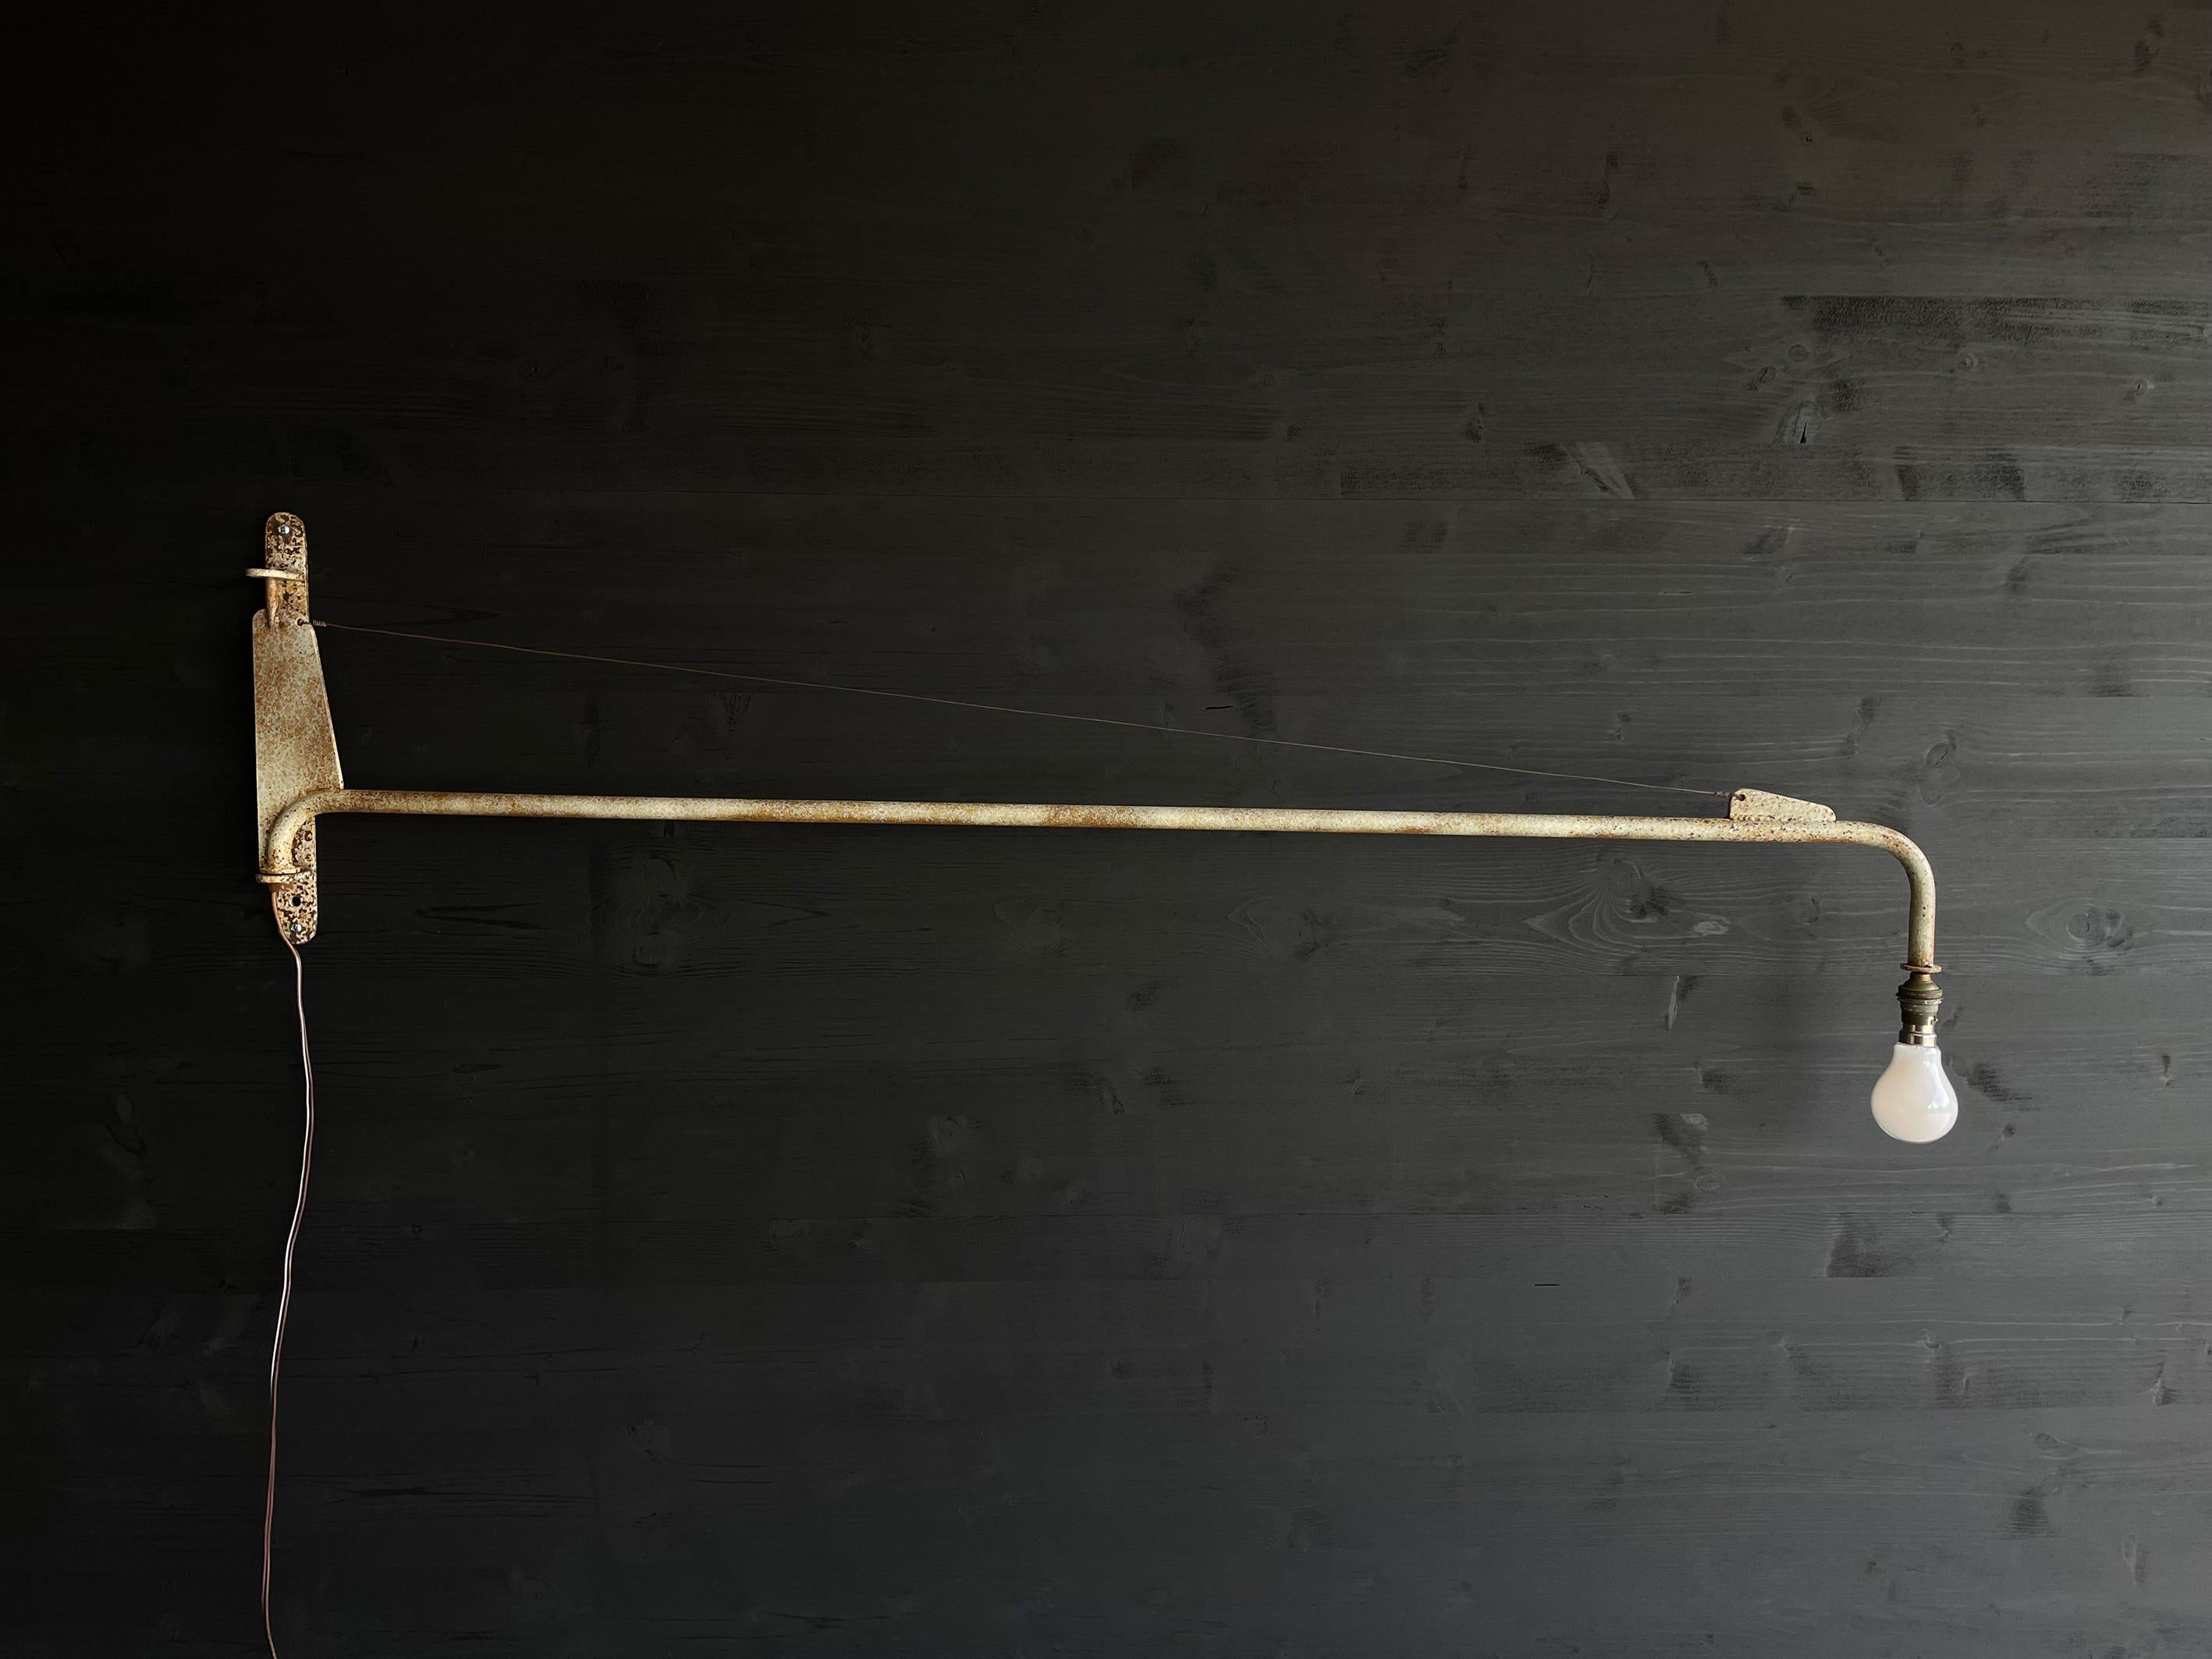 Jean Prouvé, model Sconce, «Petite potence» wall lamp, designed 1947, manufactured in france.
Steel arm with wire reinforcement, natural oxidation of time. B22 Bulb.

Jean Prouvé believed in design as a vehicle for improvement. His manufactory